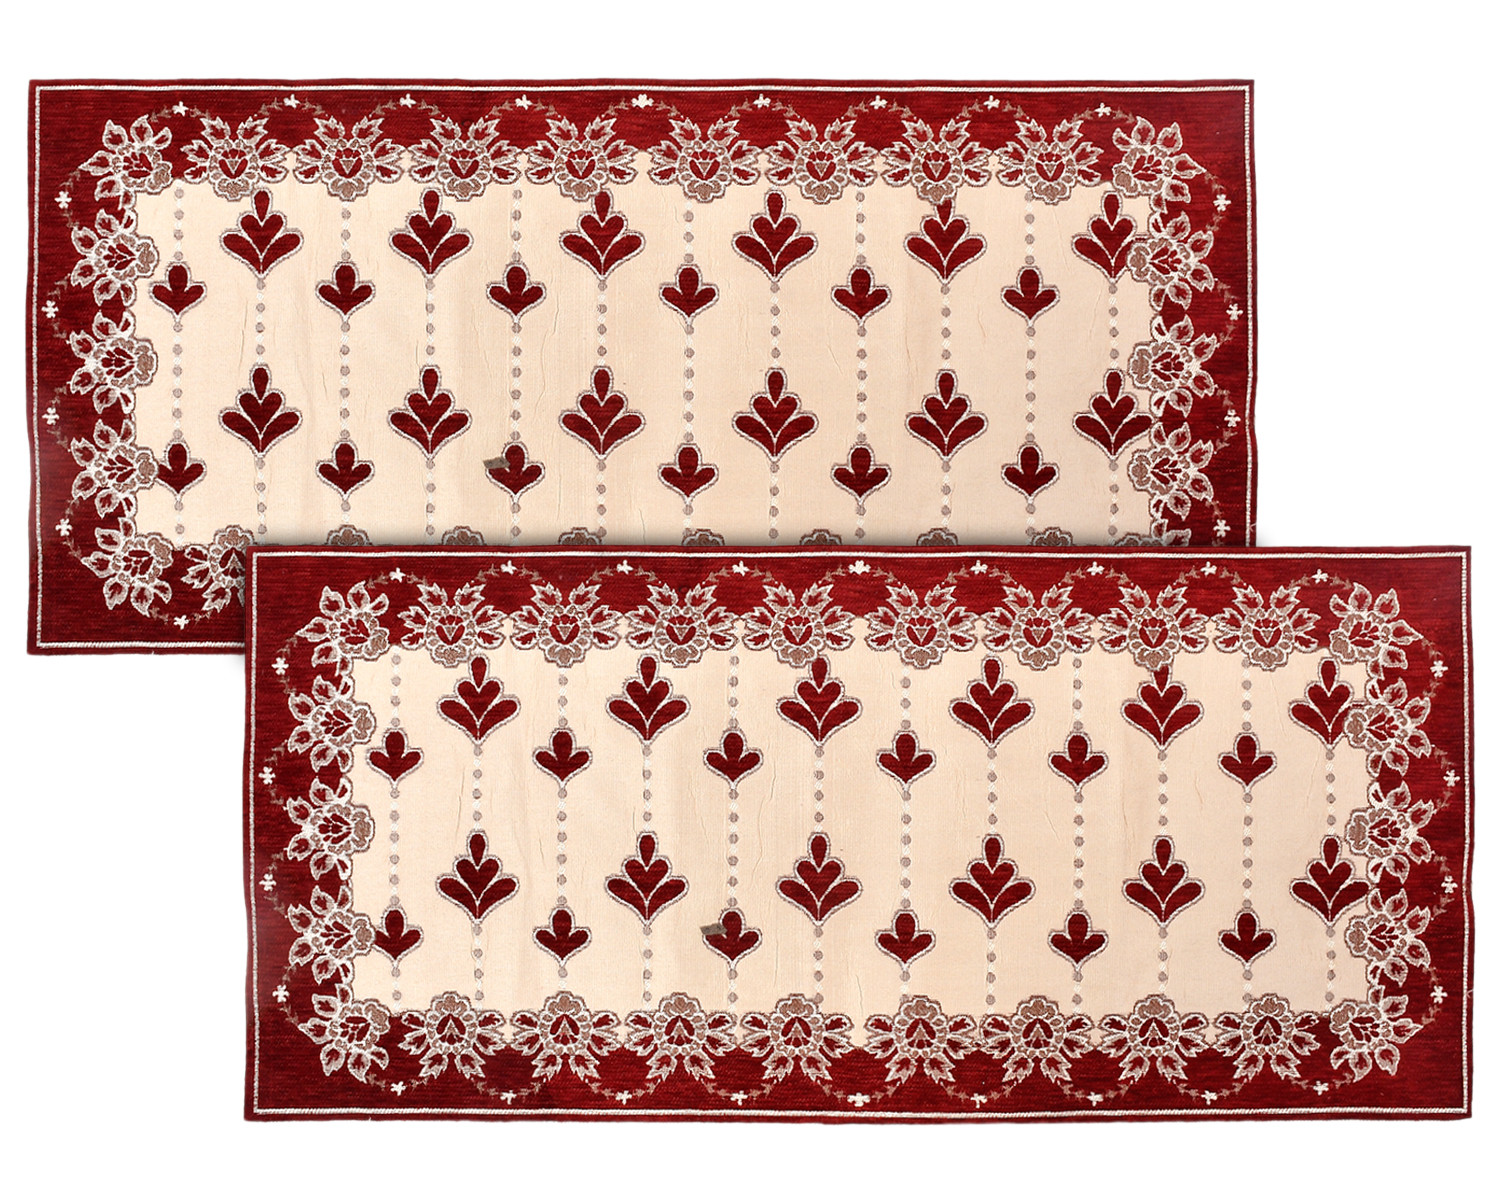 Kuber Industries Multiuses Floral Print Rectangular Cotton Table Runner for Dining and Center Table (Maroon)